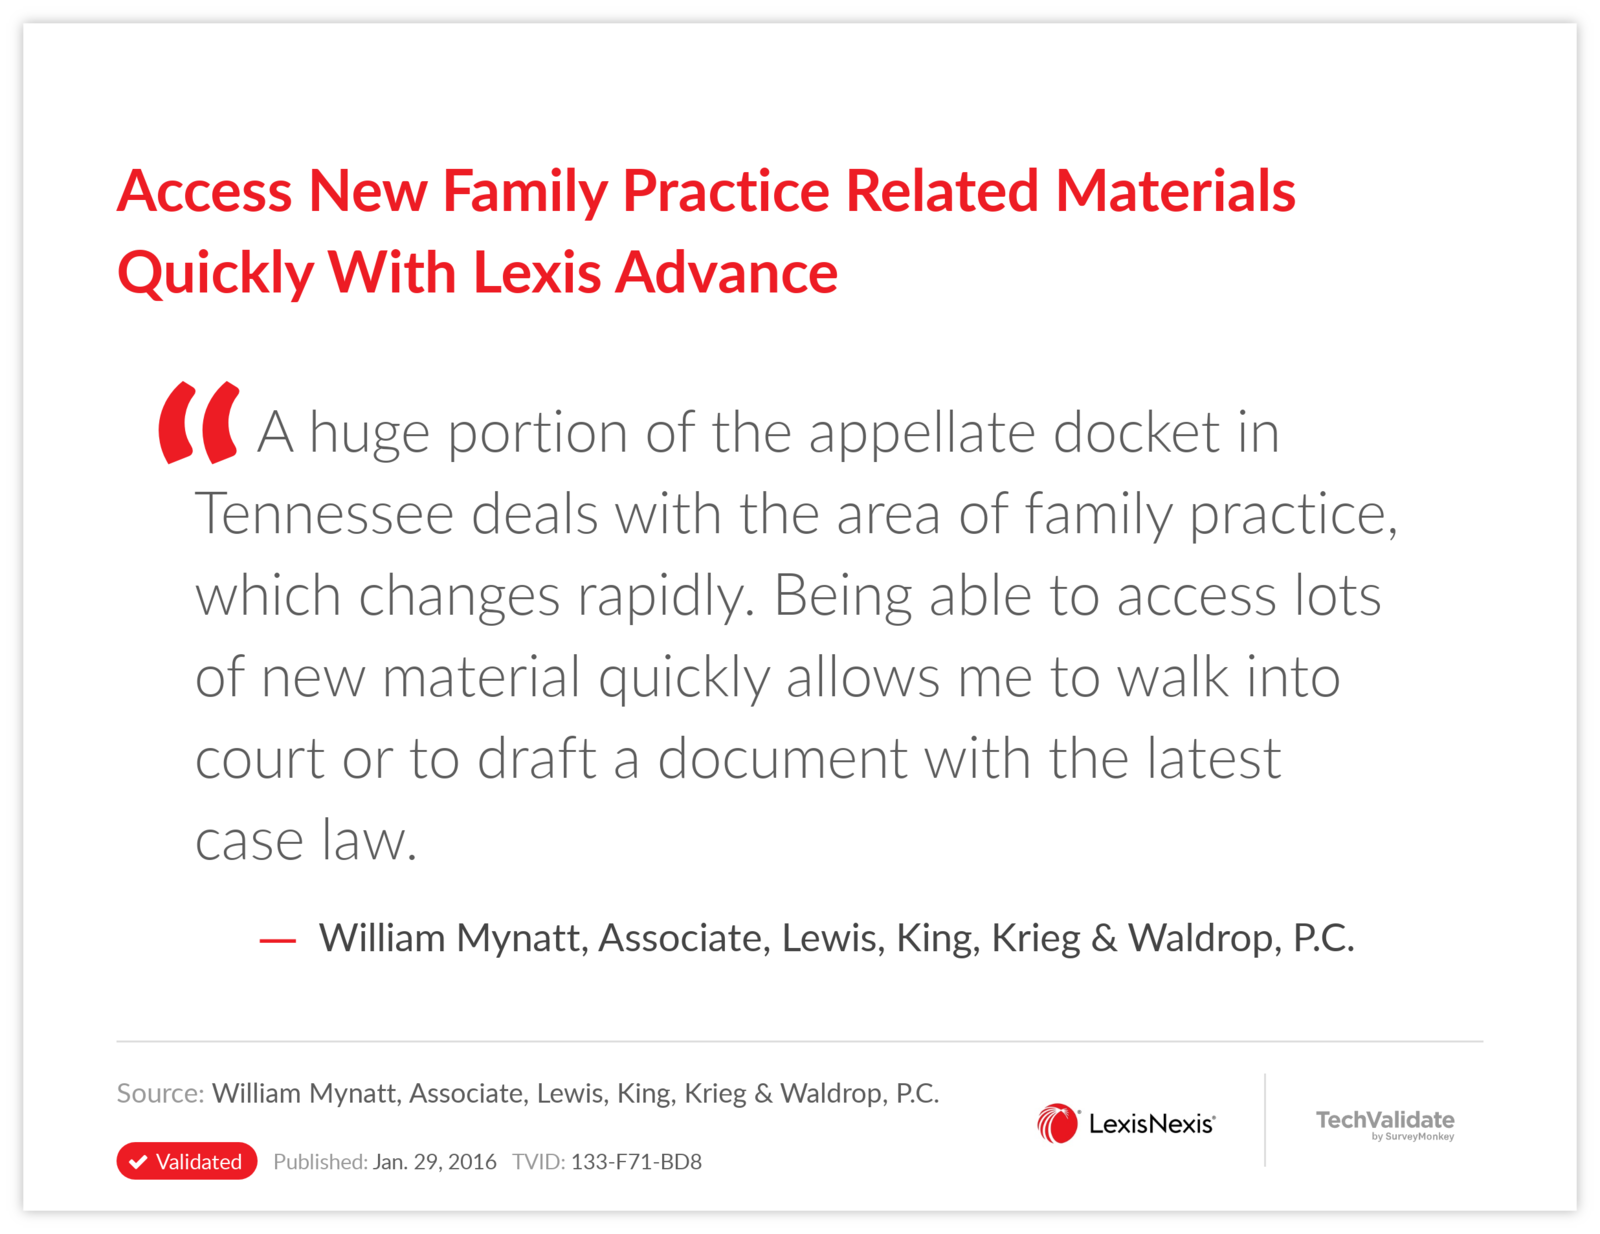 Access New Family Practice Related Materials Quickly With Lexis Advance